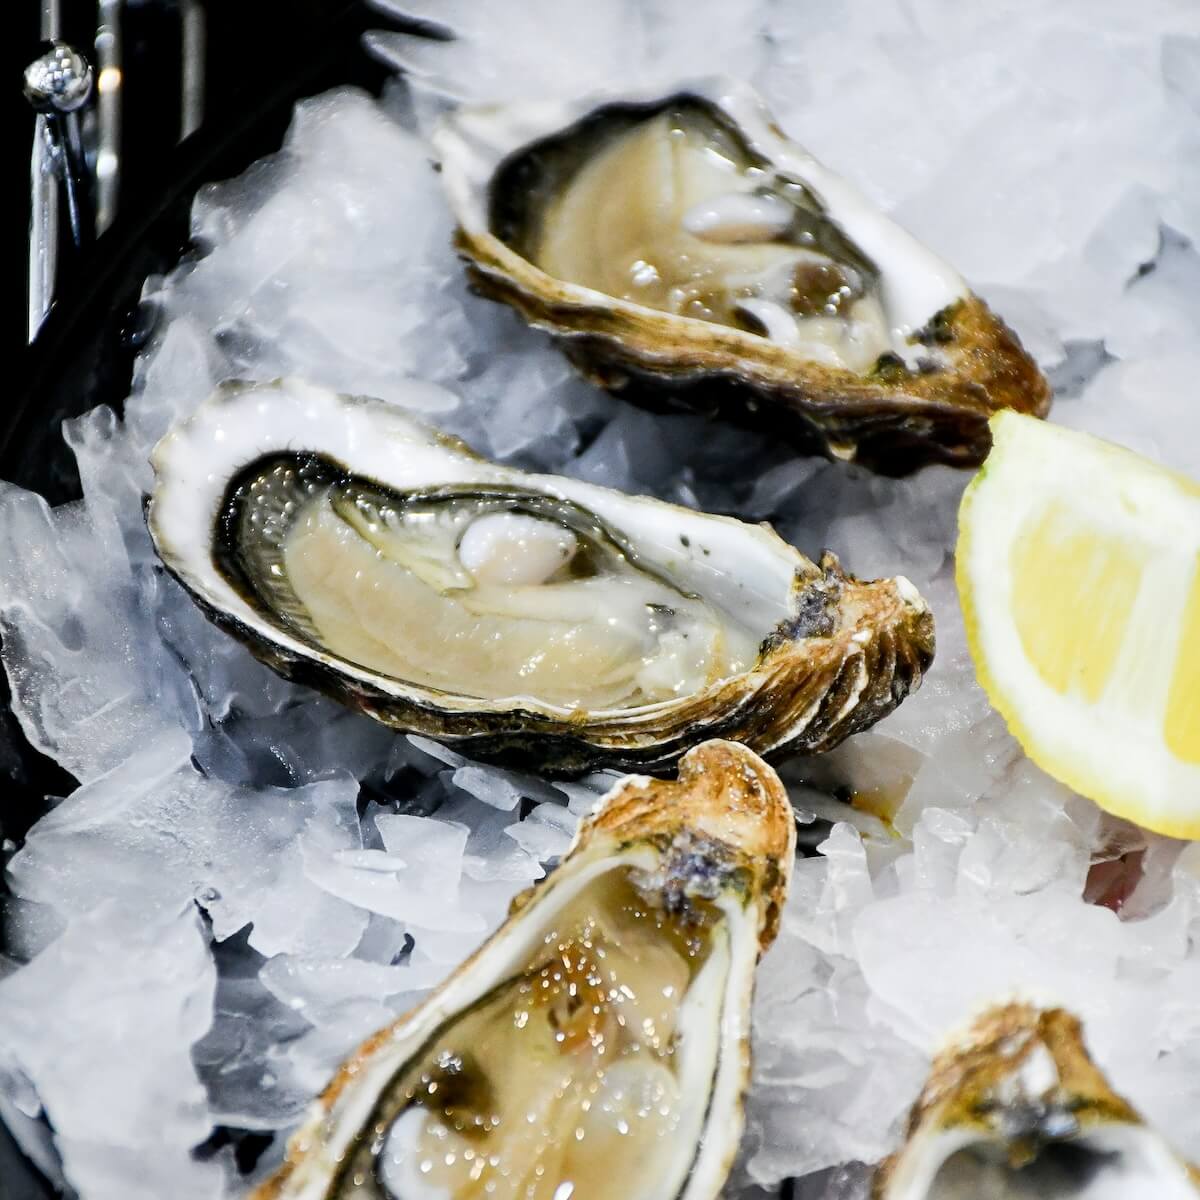 Raw oysters can give you vibrio, a deadly bacteria